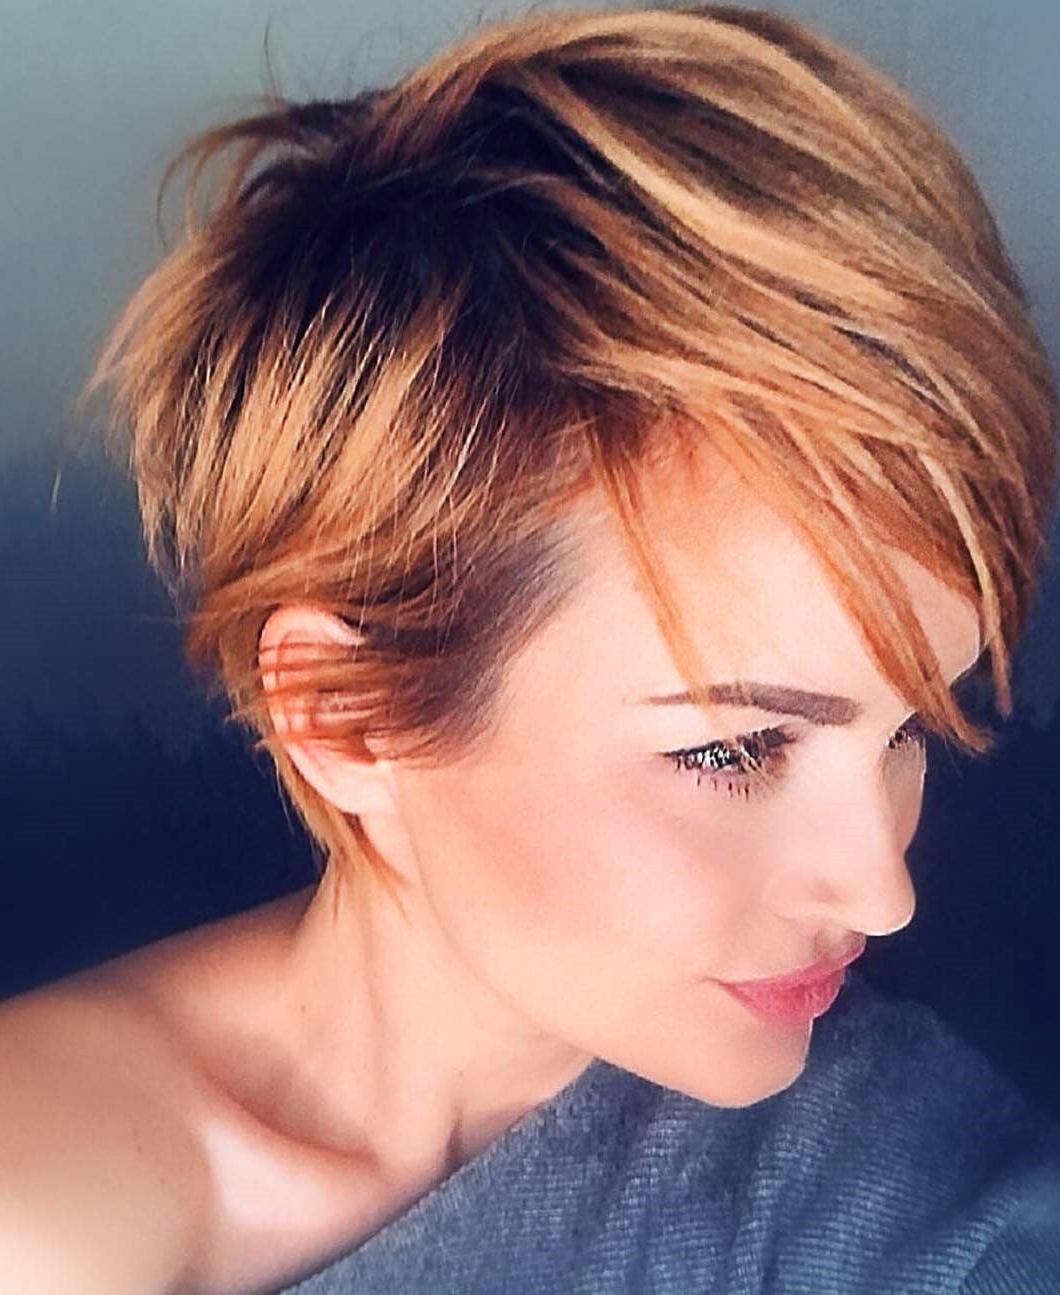 80 Trendy Short Pixie Hairstyles For Women -   16 edgy hairstyles Short ideas